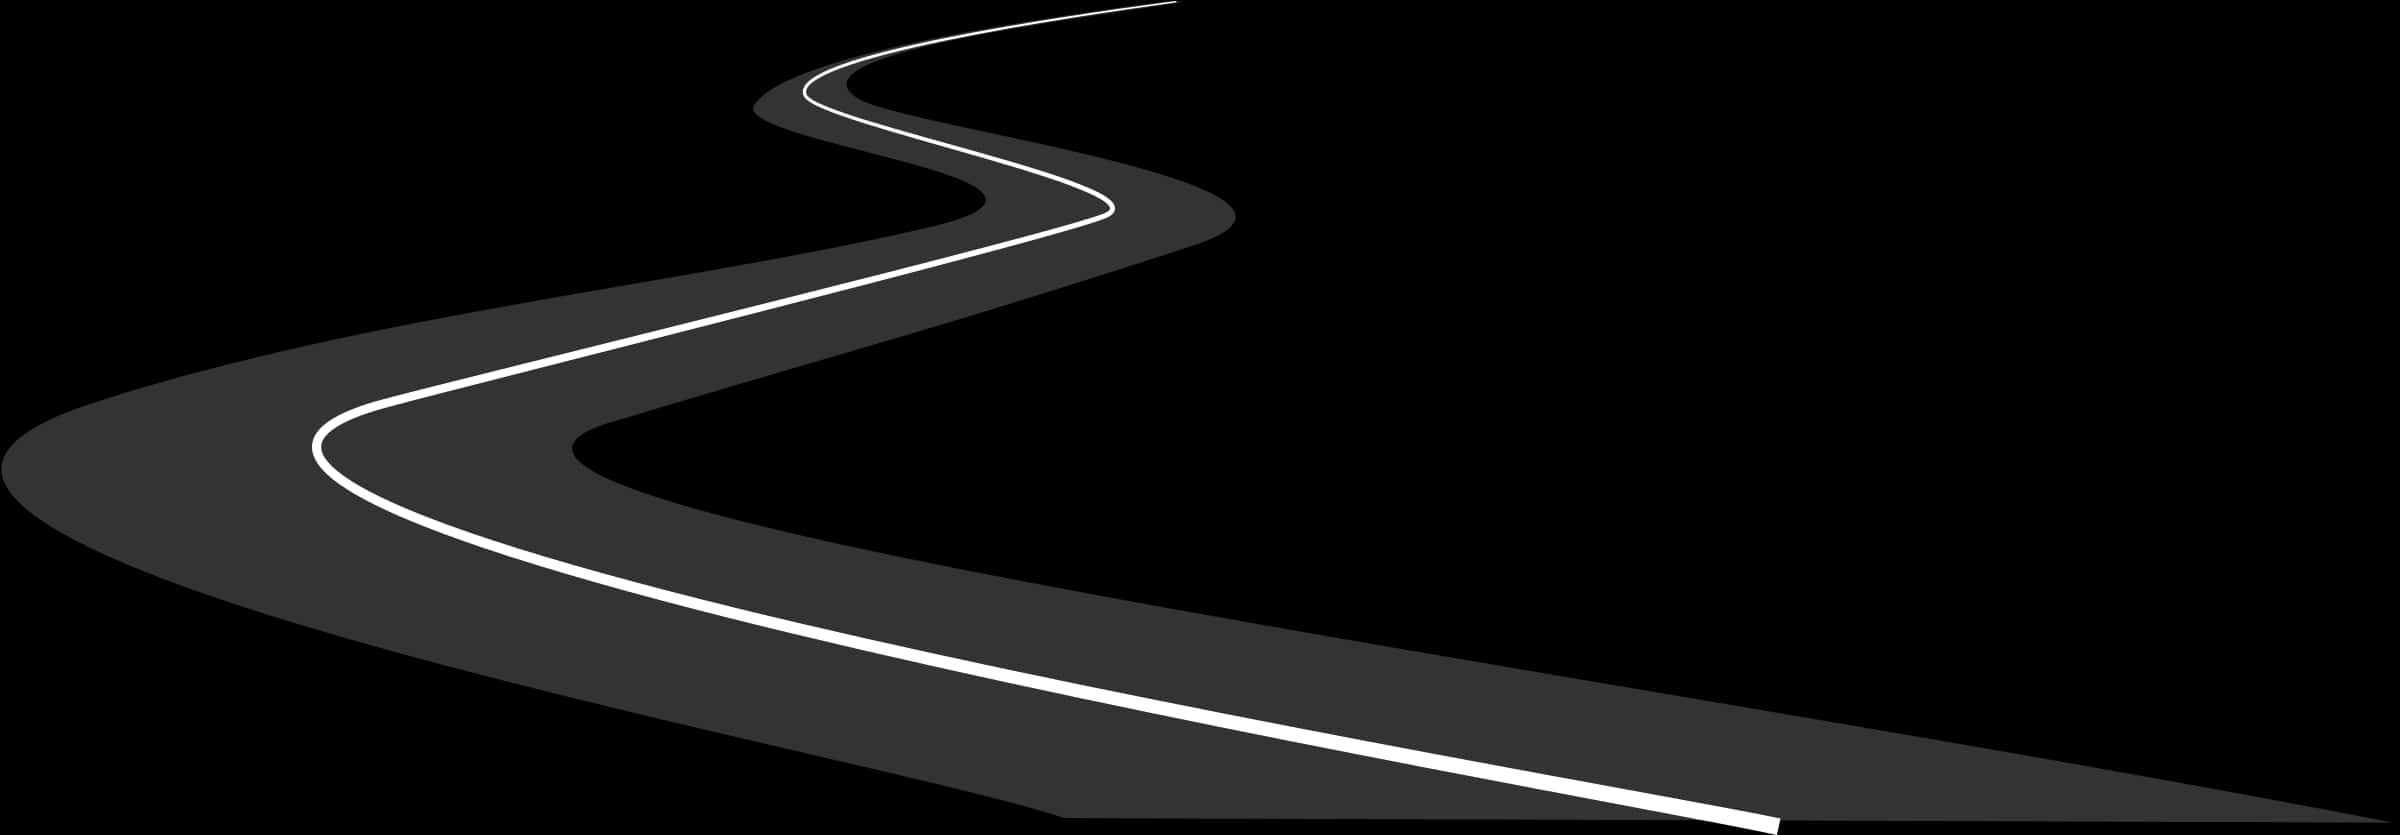 Curvy Road With White Line